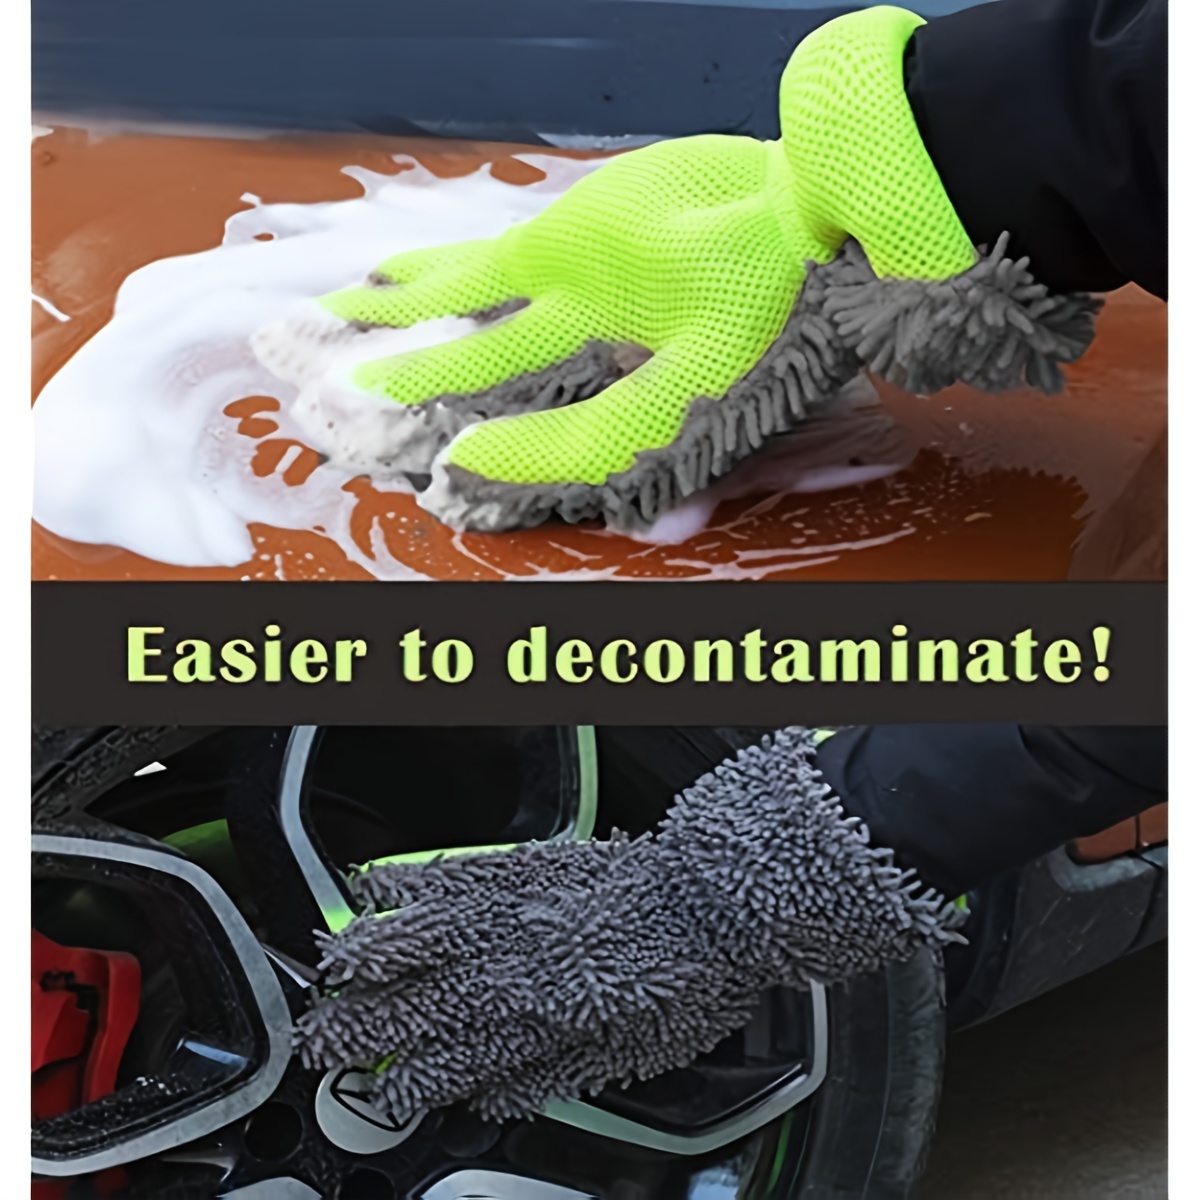 Double sided chenille microfiber car wash mitt glove - Pack of 2 